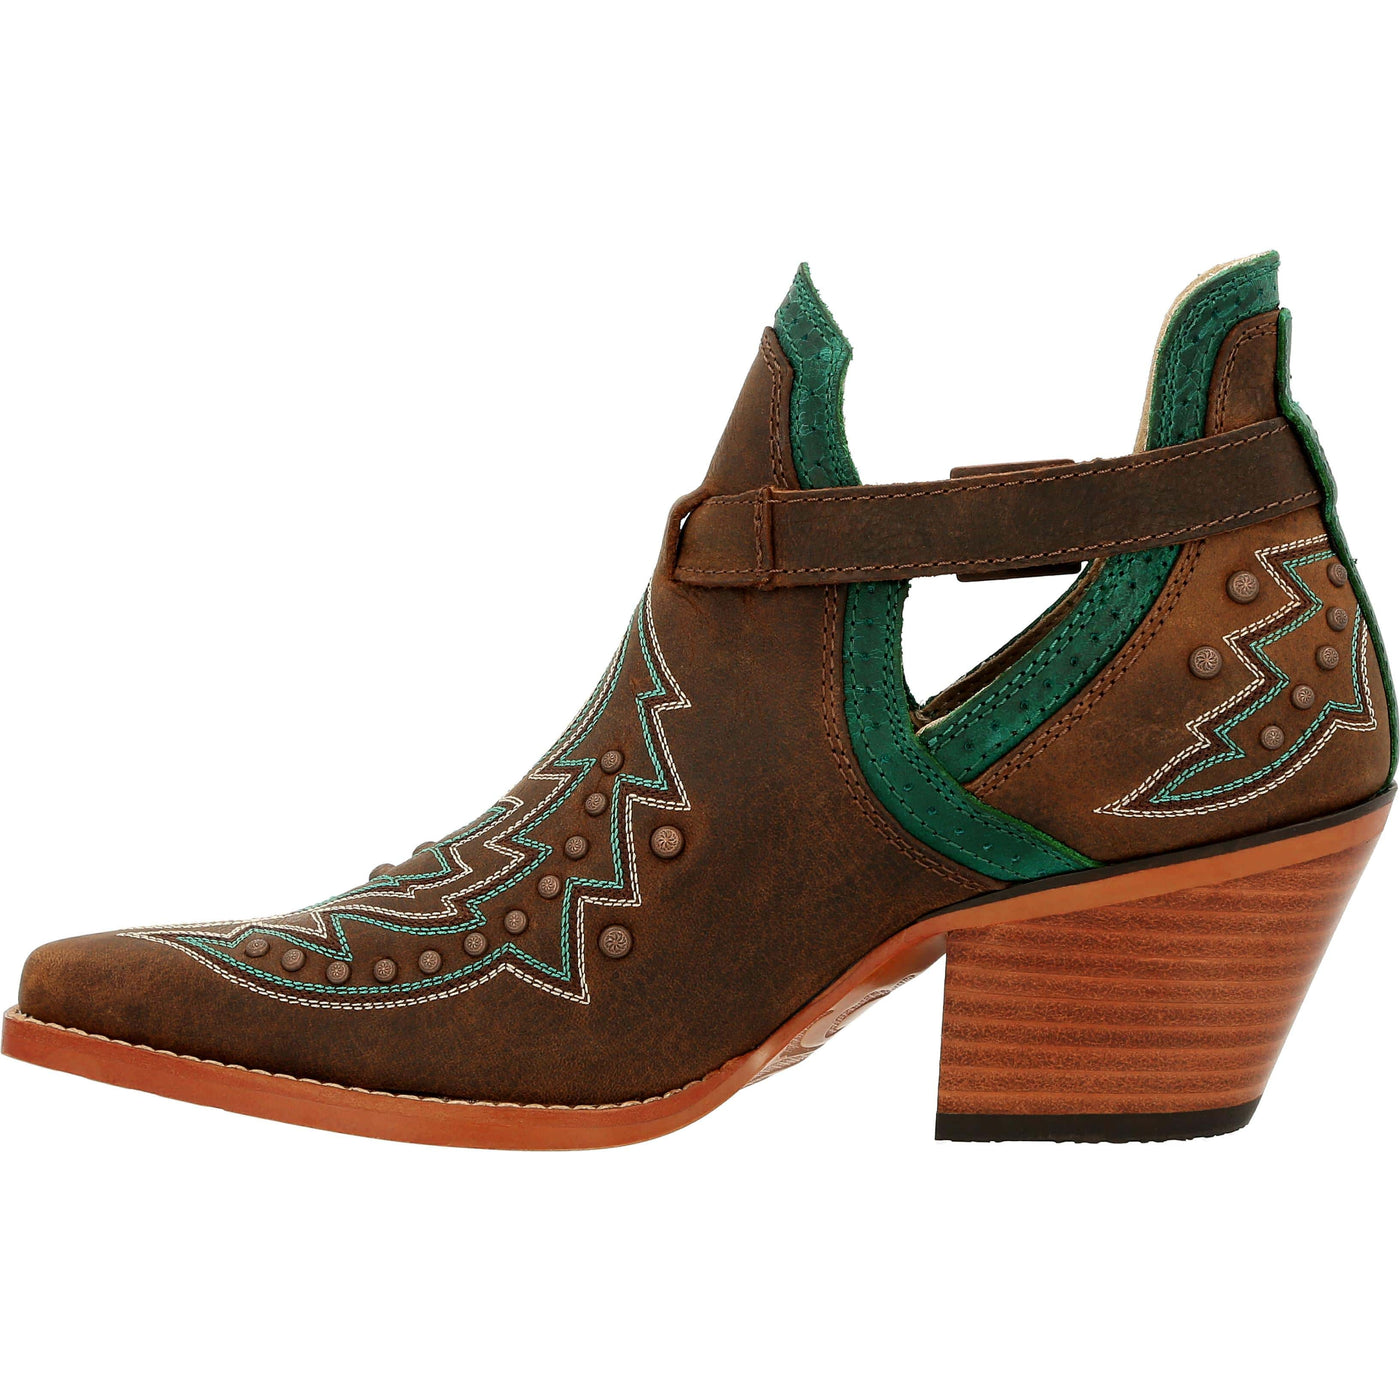 Durango | Women's Crush Studded Western Fashion Bootie | Brown - Outback Traders Australia